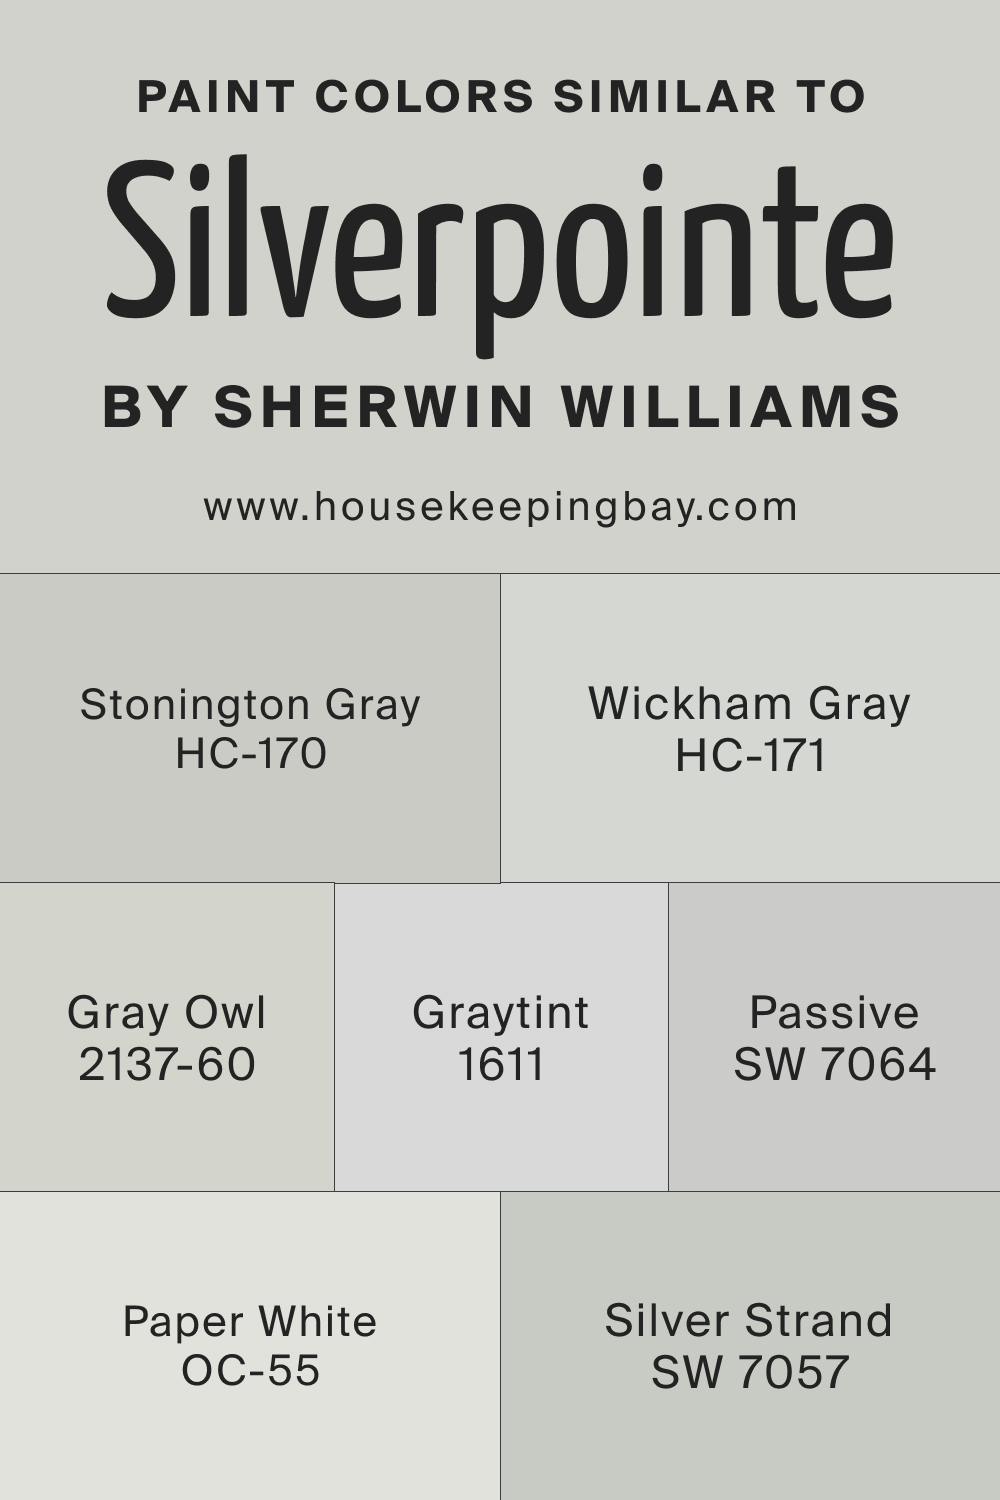 Paint Colors Similar to SW Silverpointe by Sherwin Williams